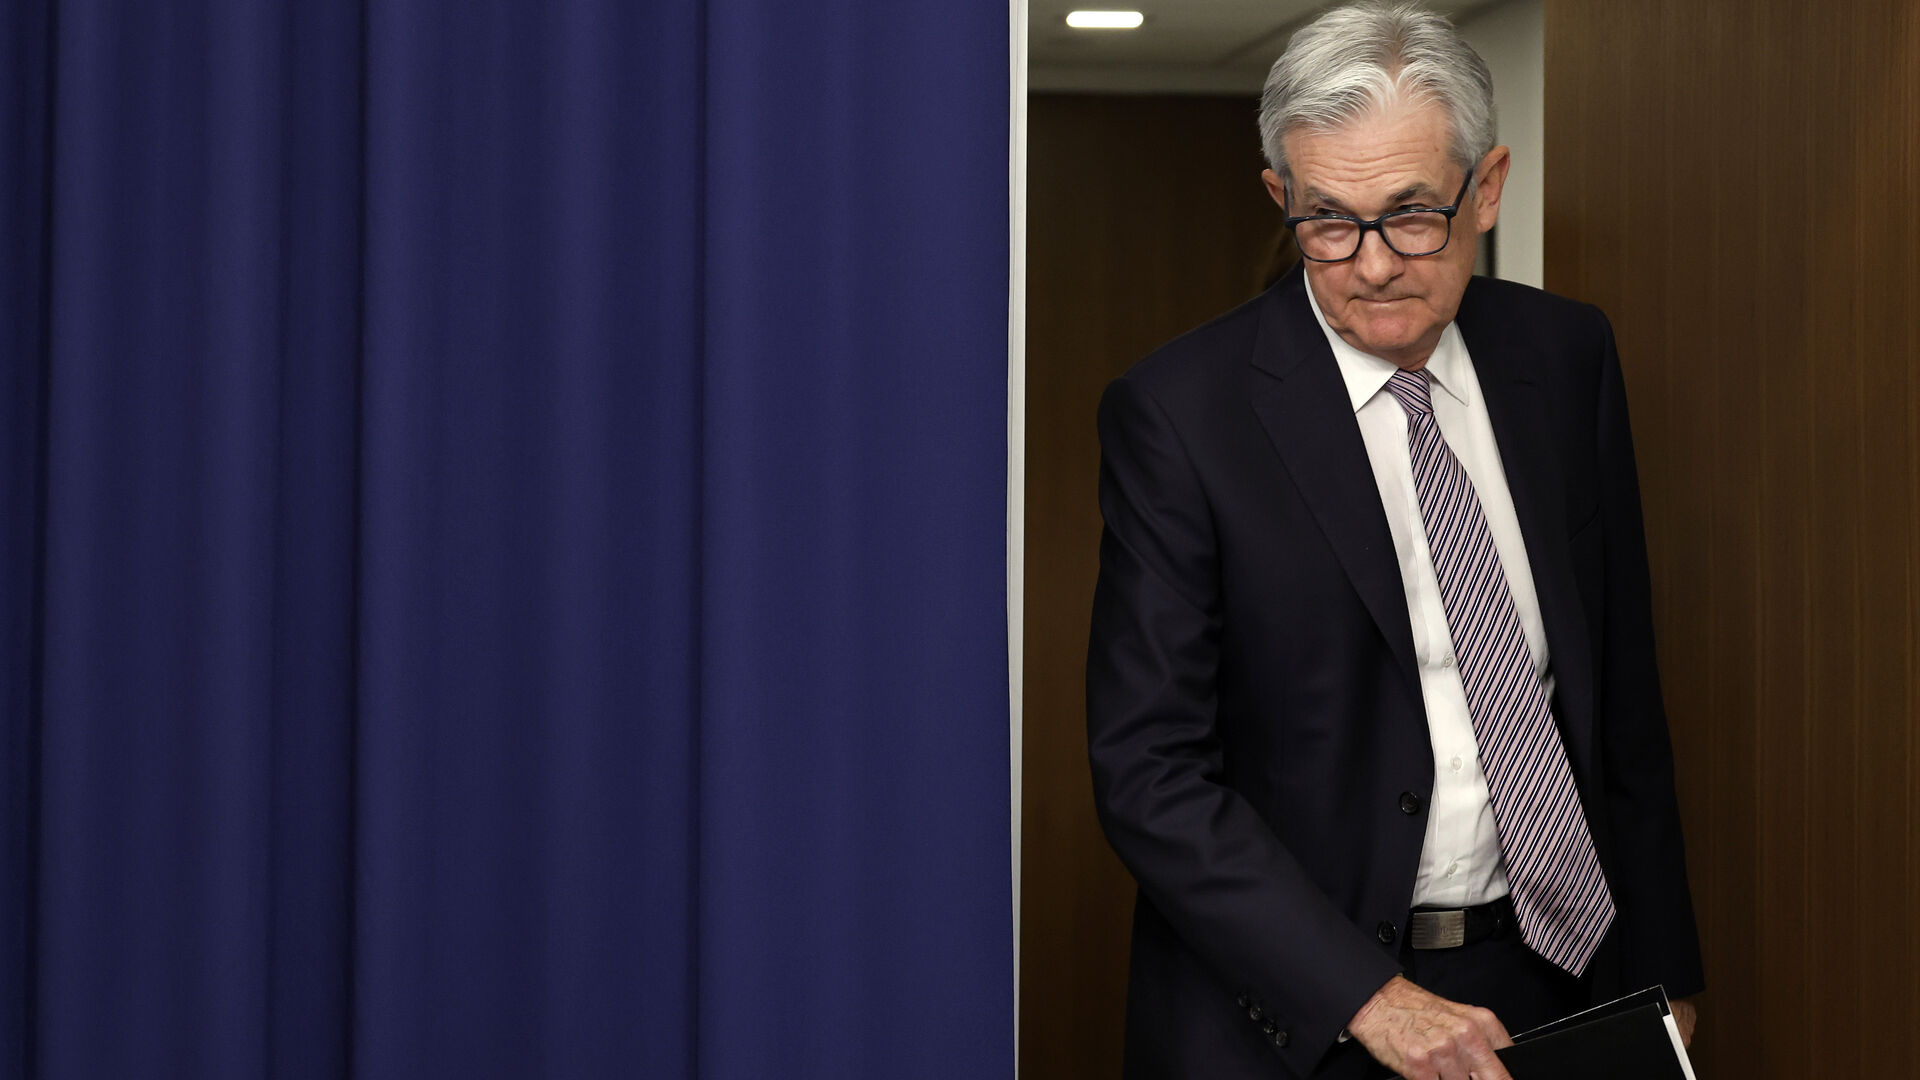 Is the 10th hike the charm? The Fed has now hiked its interest rate by 5% in a little more than a year to fight inflation.